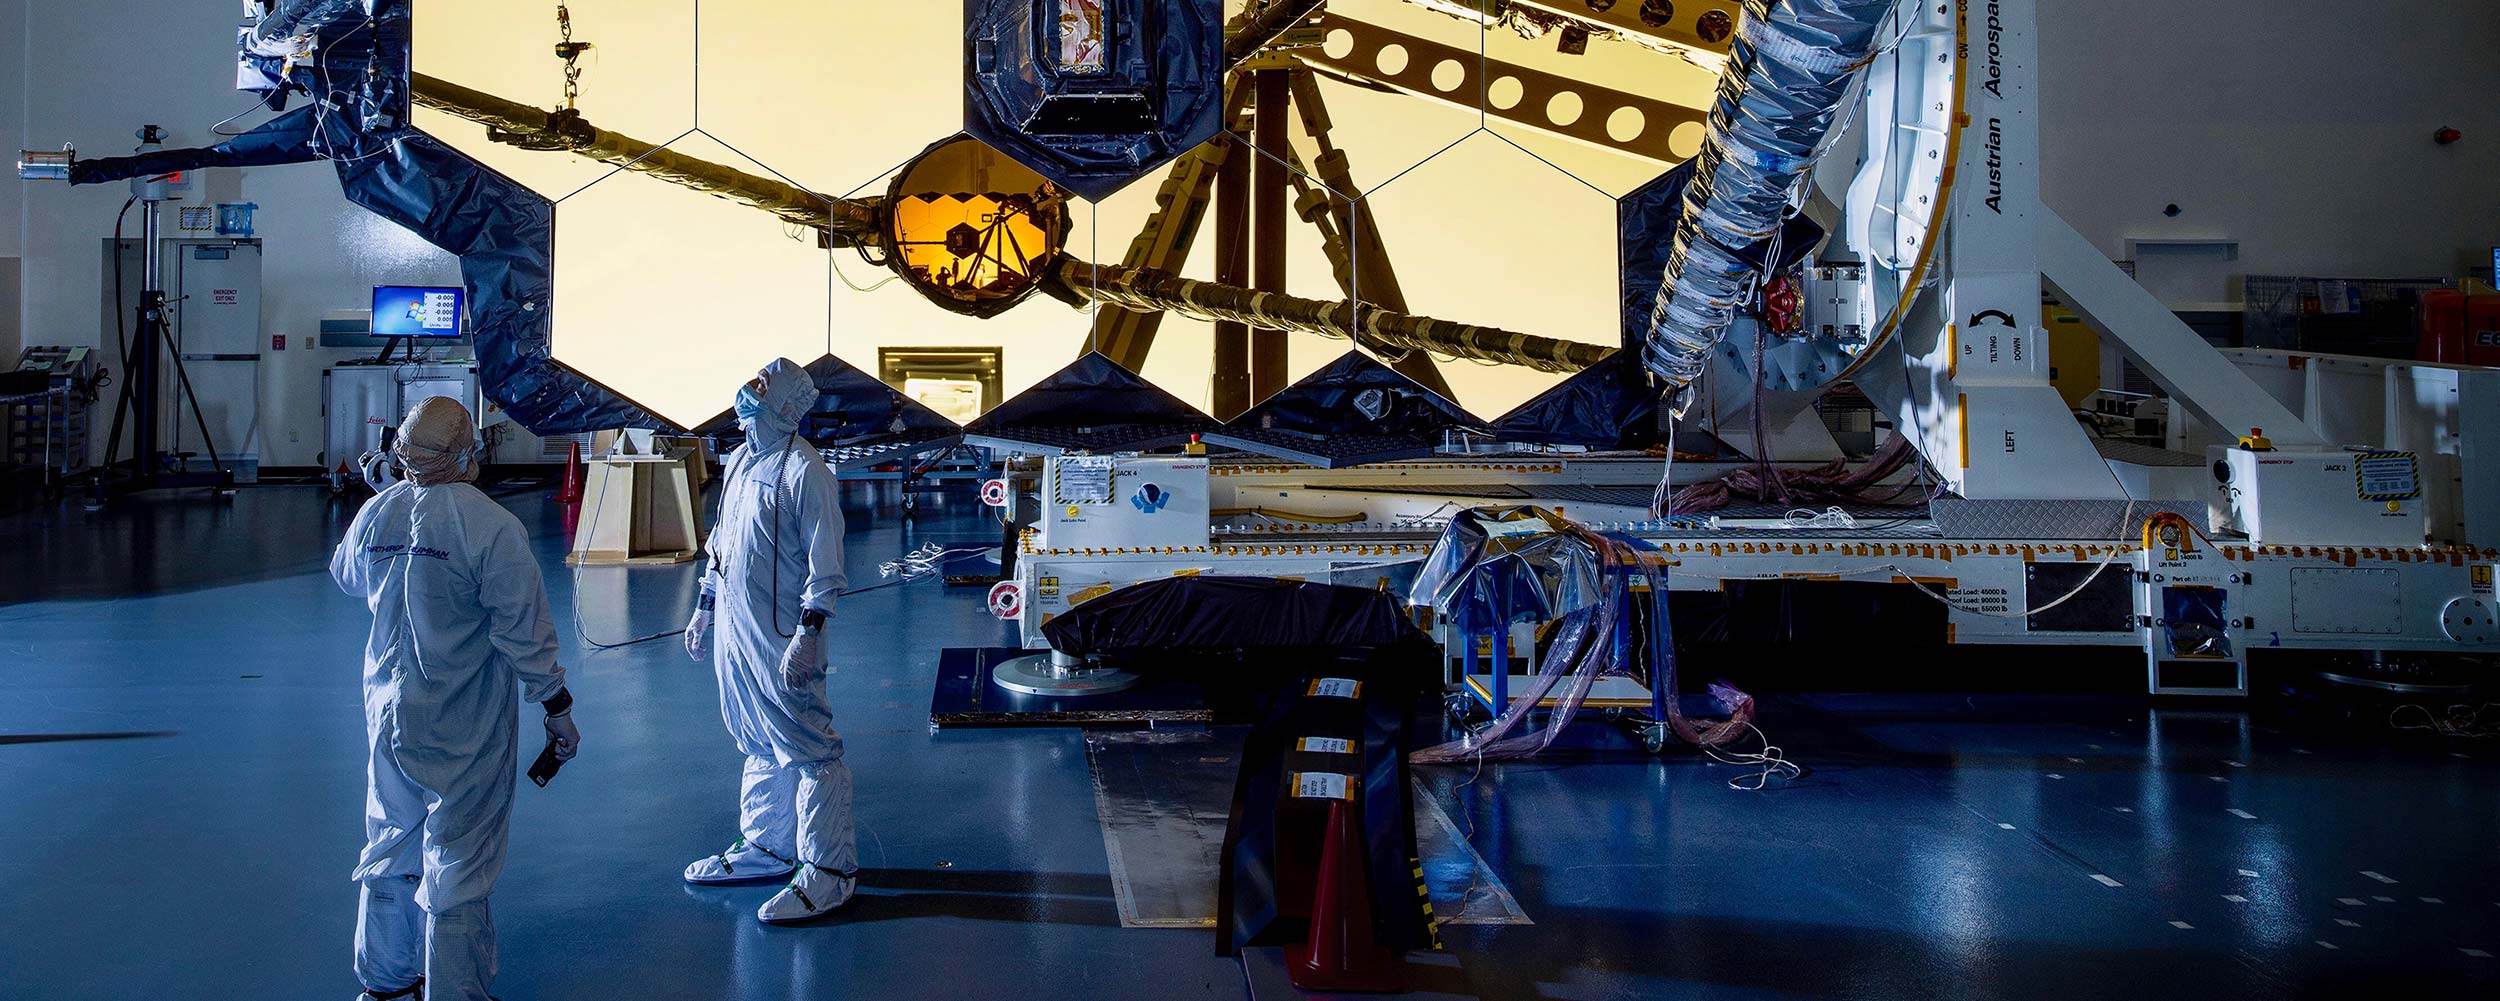 Two people in clean suits look up at the James Webb Space Telescope